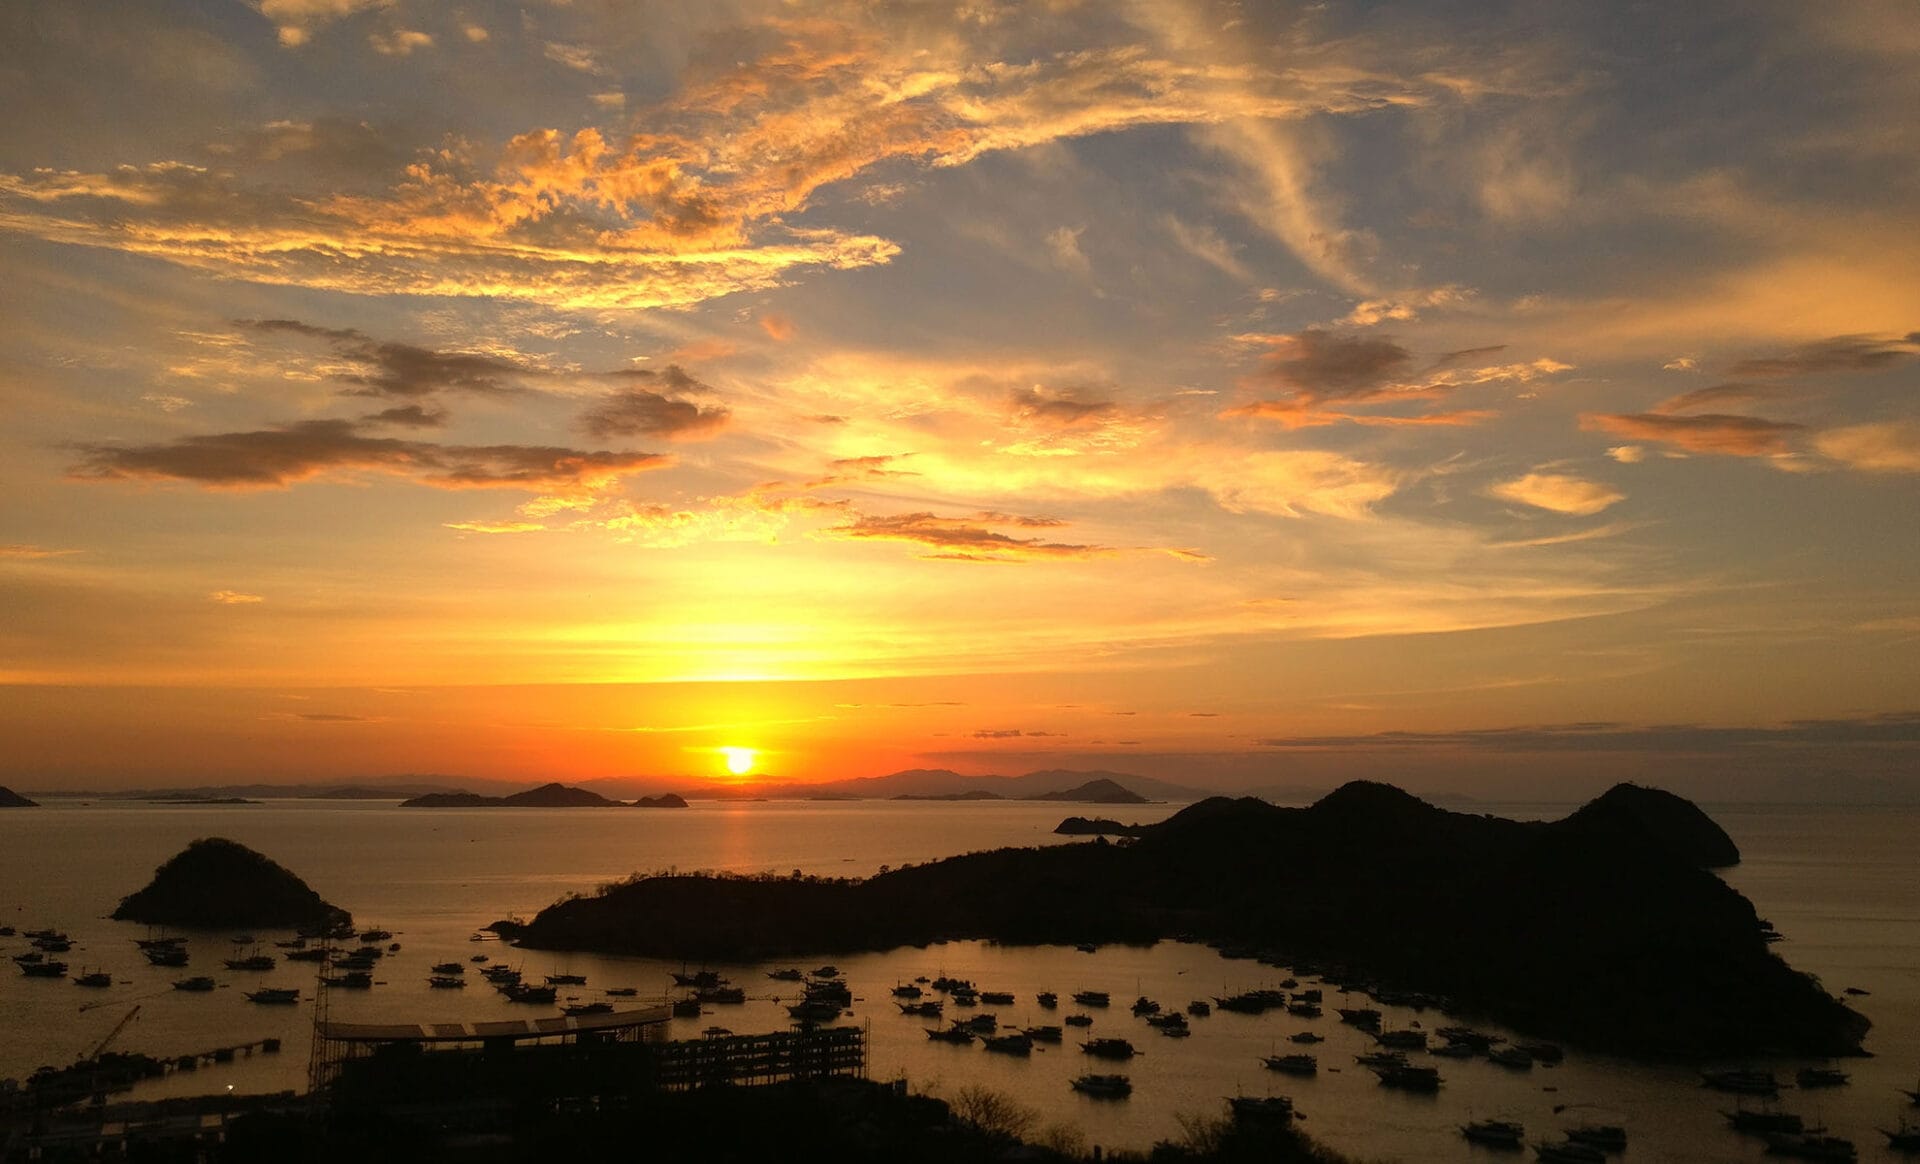 20 Top Things to Do in Labuan Bajo You Shouldn't Miss Out On ...